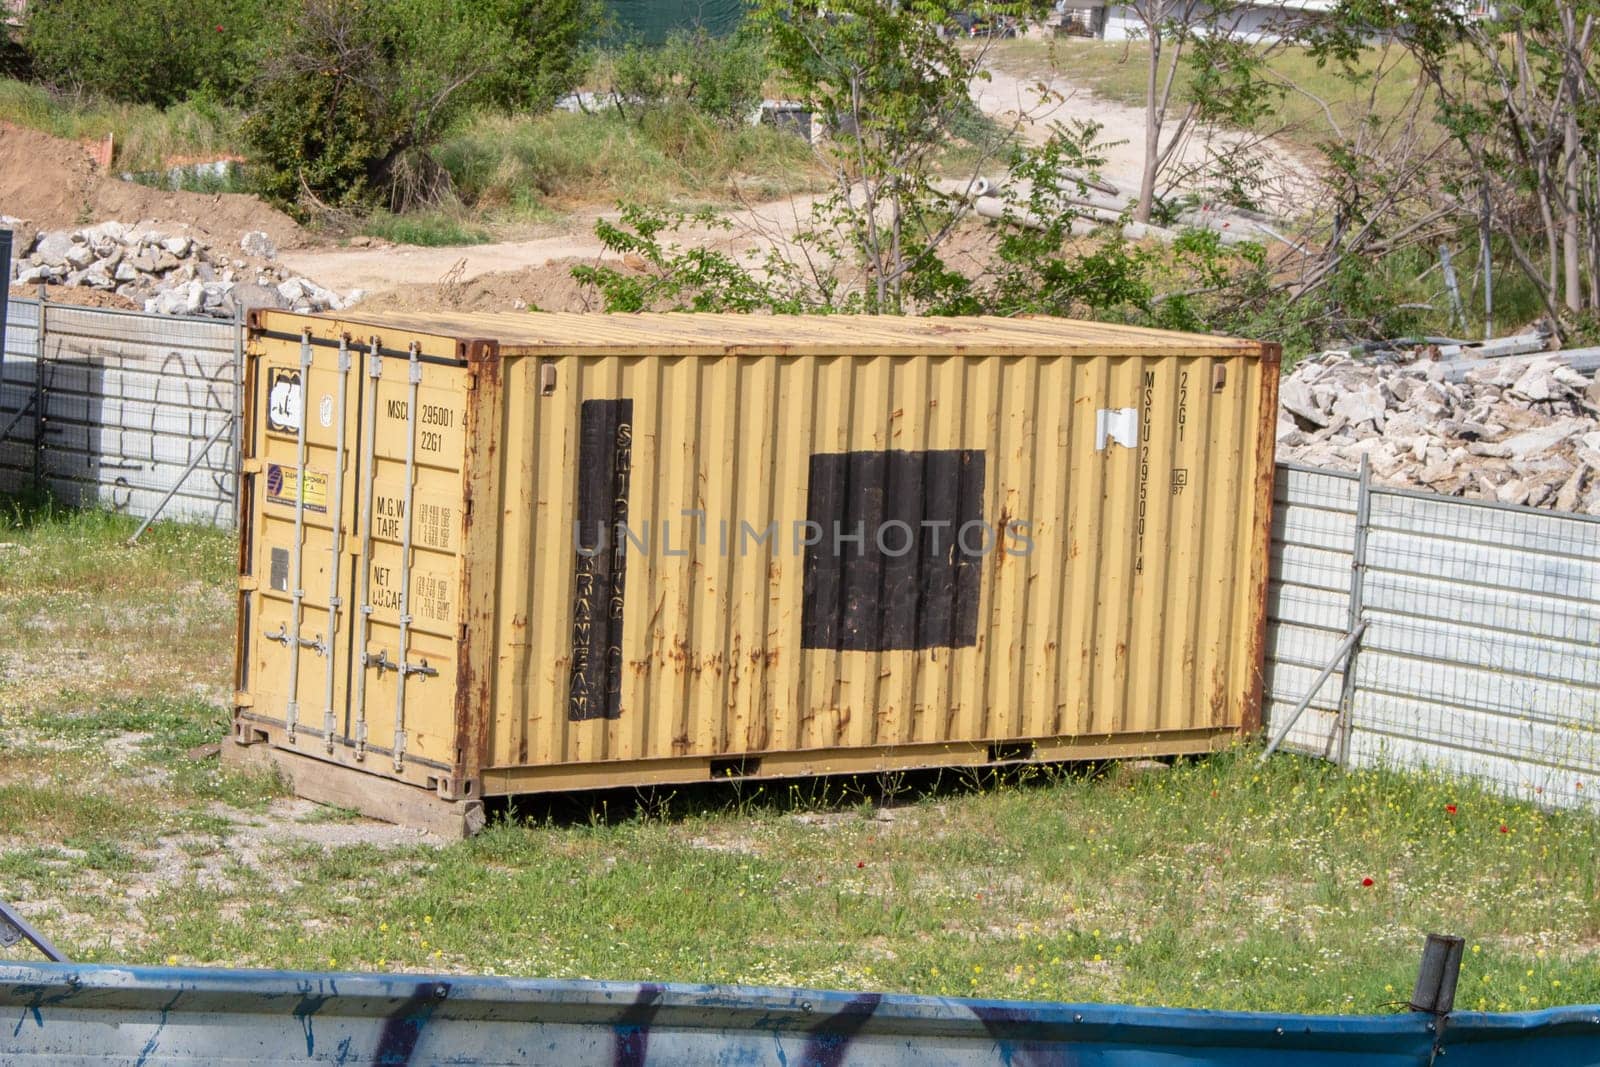 A shipping container nestled in a yard serves as a robust industrial storage solution, efficiently housing goods and materials in a commercial setting